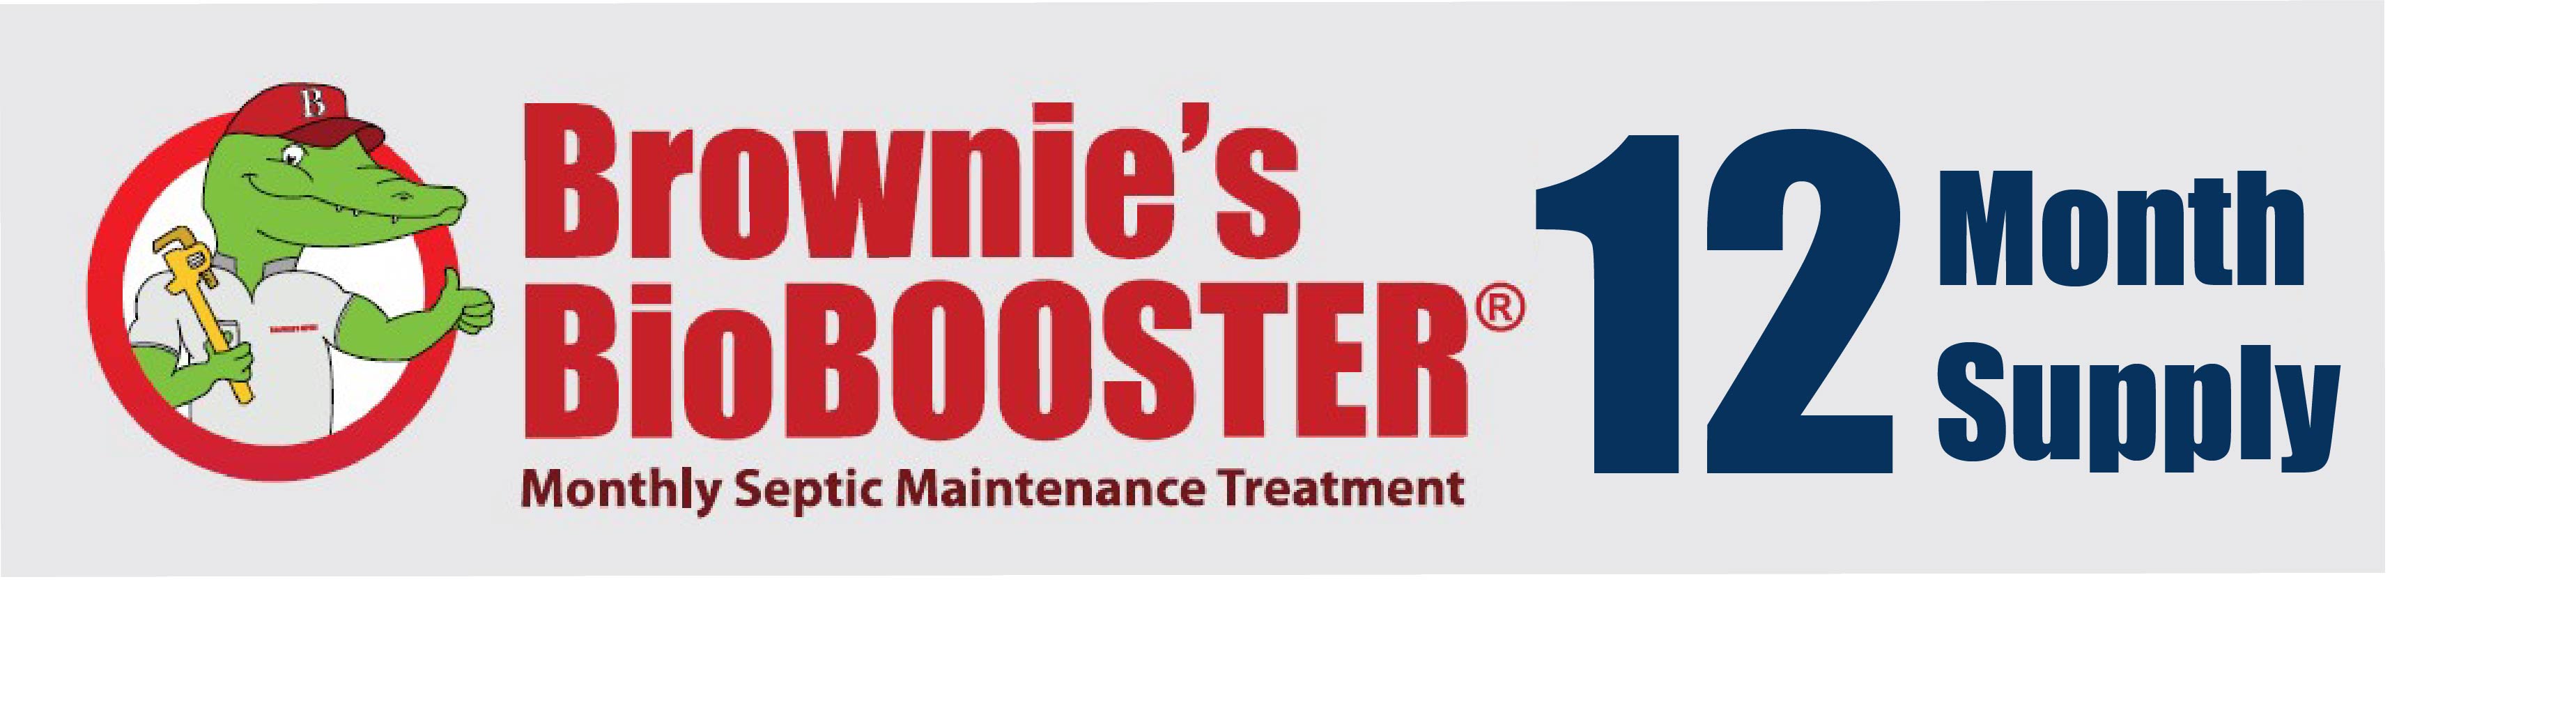 Brownie's BioBOOSTER Monthly Septic Maintenance Treatment Coupon - $59.95 12 Month Supply